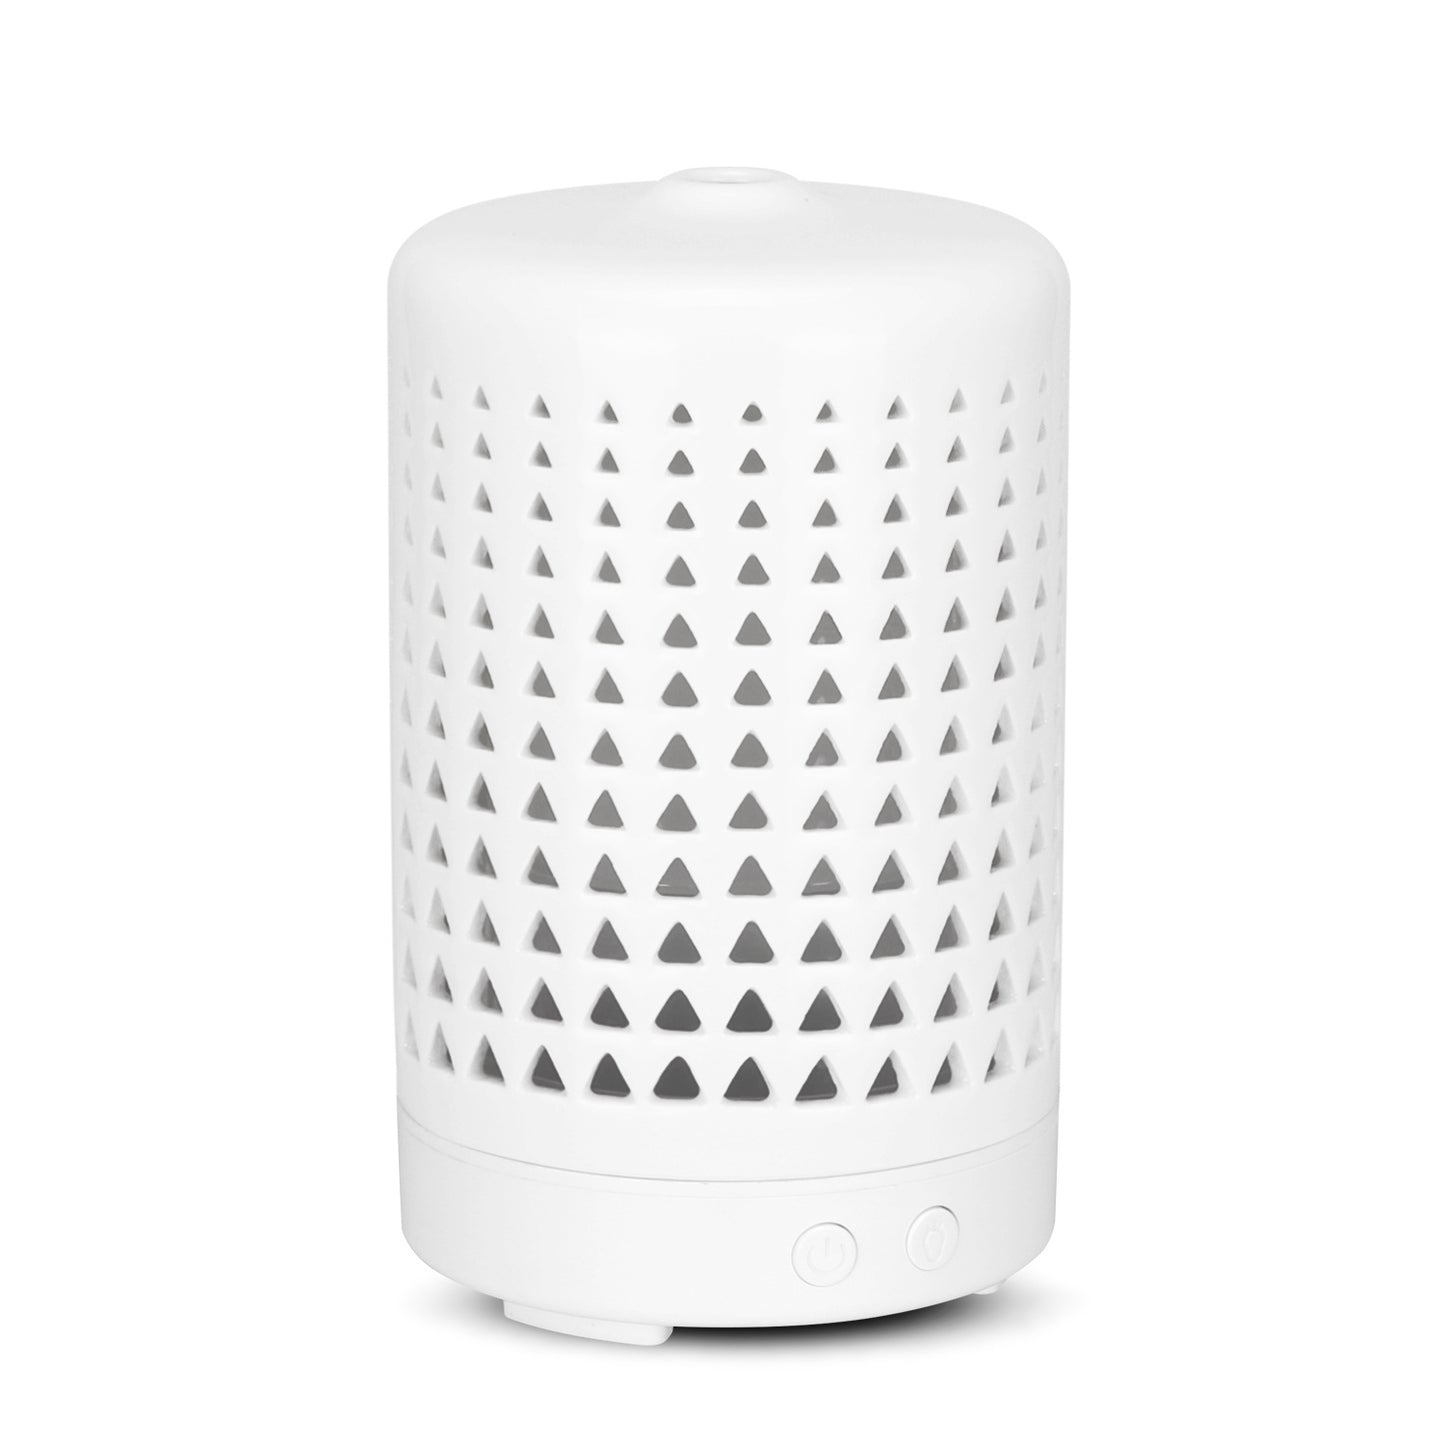 Household ceramic aroma diffuser humidifier indoor humidifier purification bedroom colorful atomizer